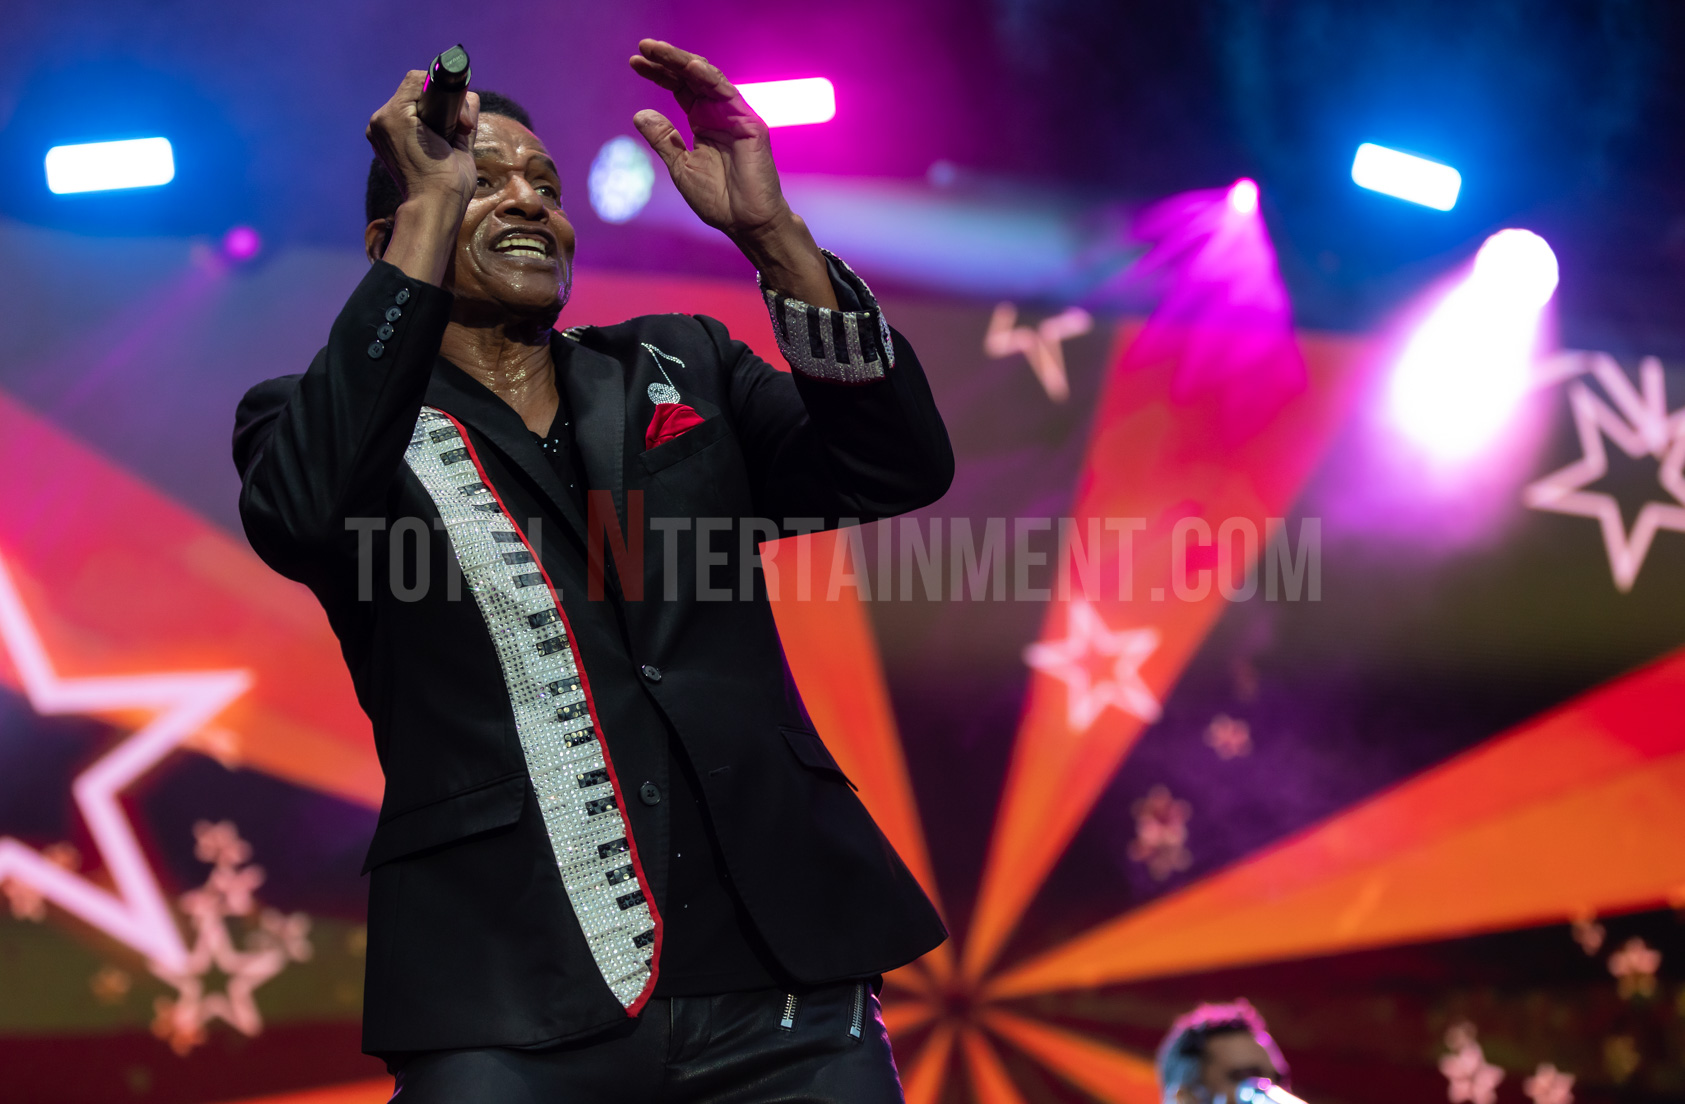 Jo Forrest, Live Event, Music Photography, Totalntertainment, Halifax, The Jacksons, The Piece Hall